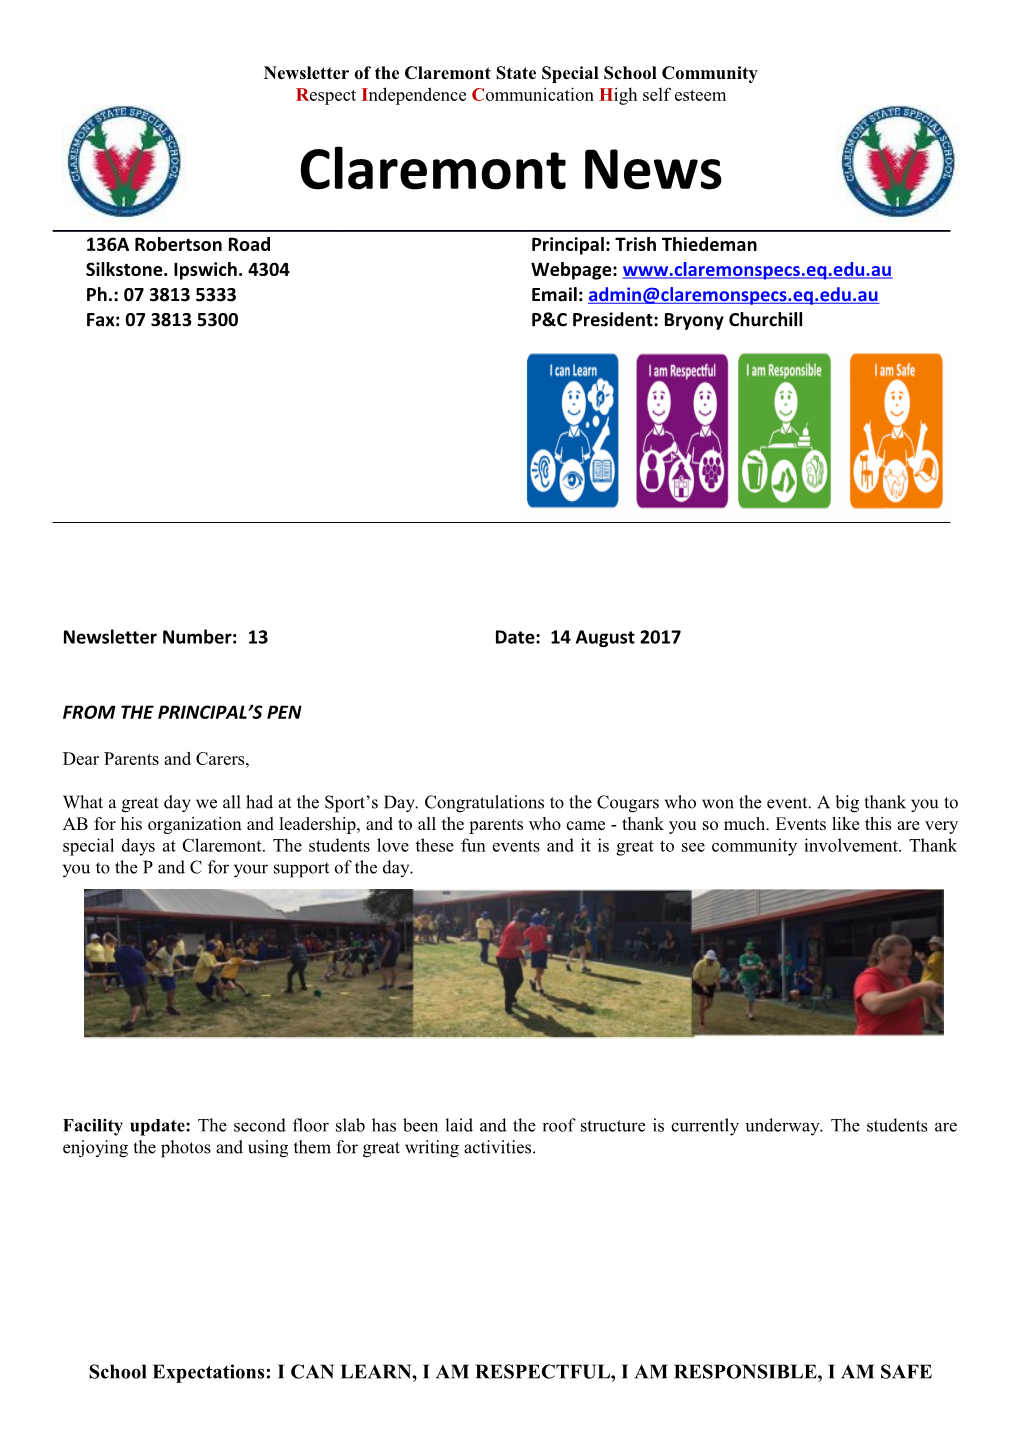 Newsletter of the Claremont State Special School Community